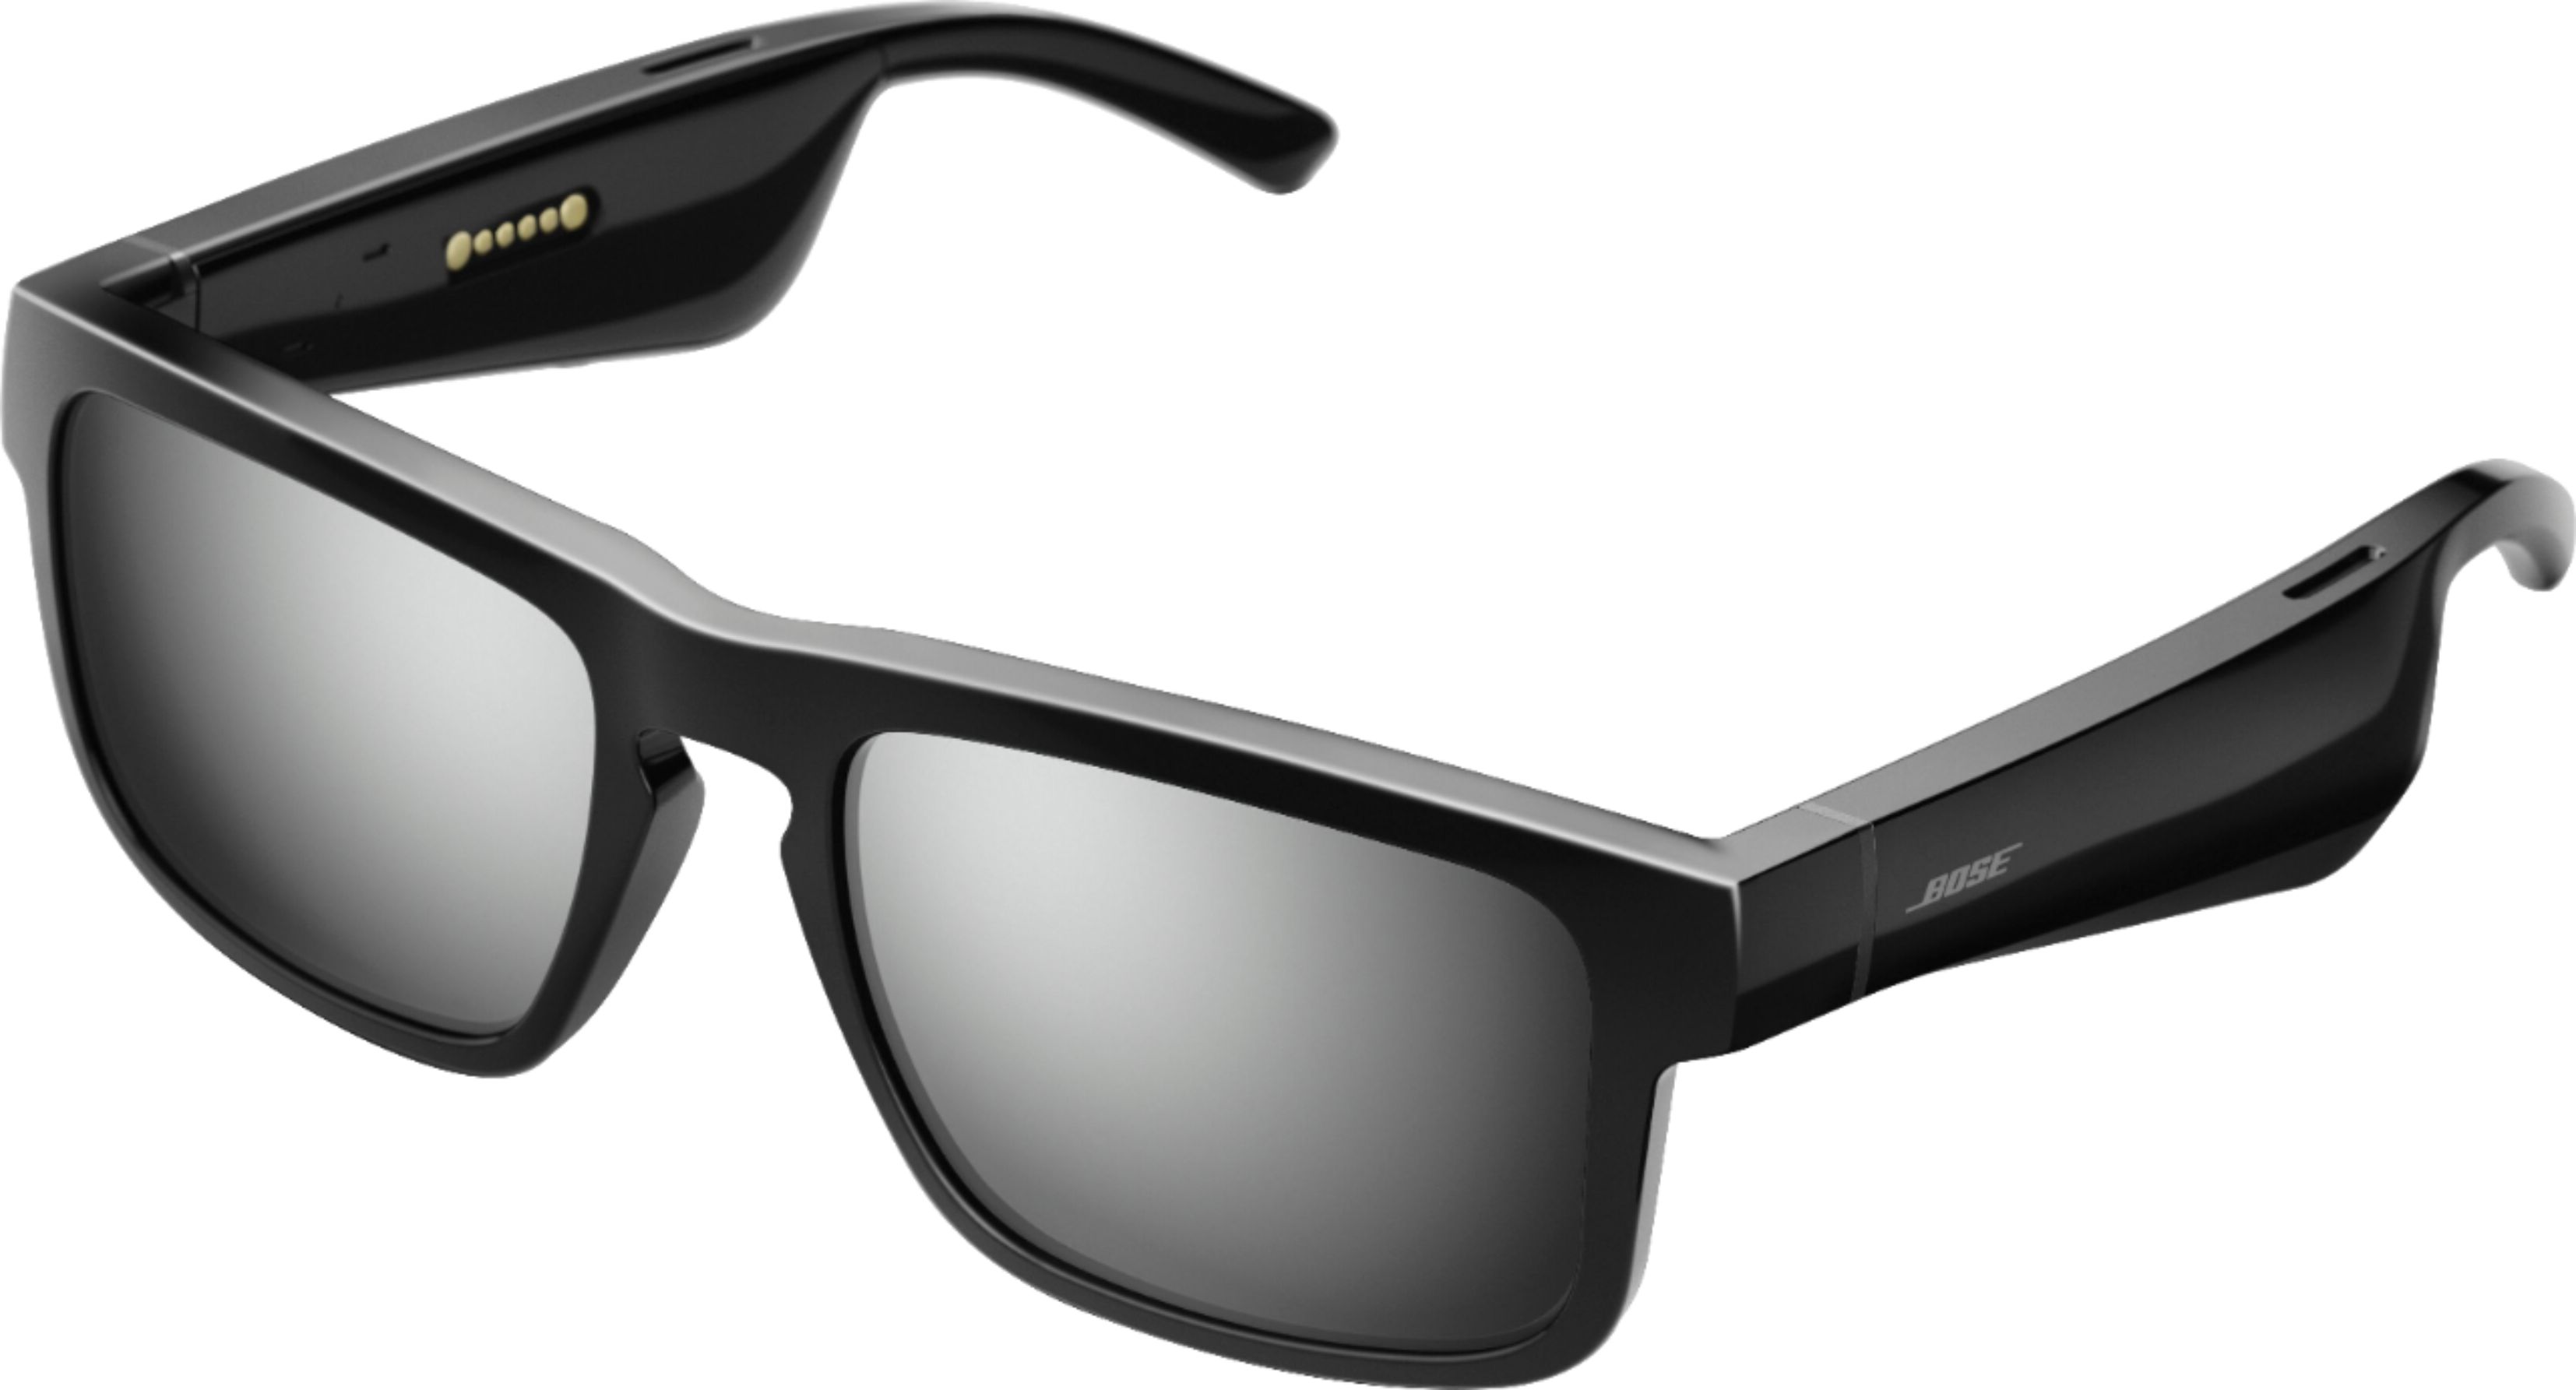 Best Buy: Bose Tenor Style Lenses Polarized Mirrored Silver 855978-0310